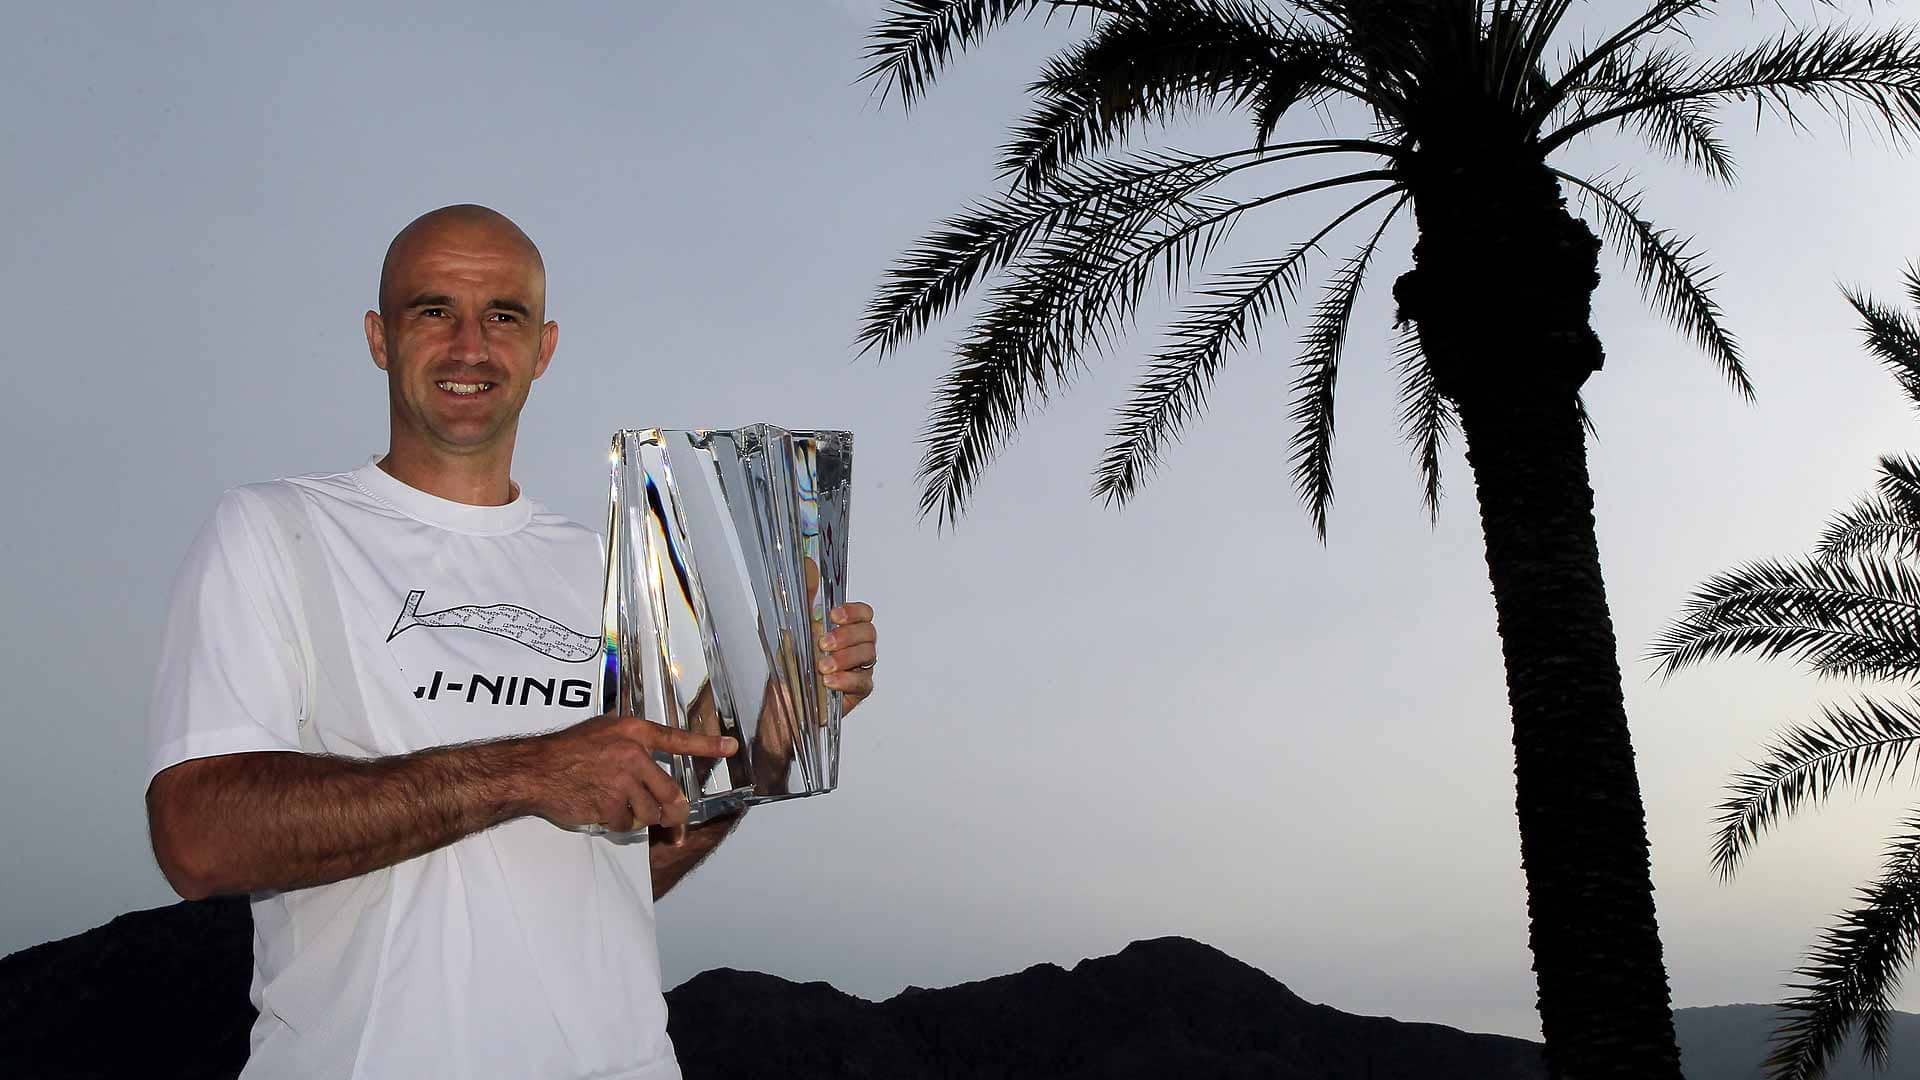 Ivan Ljubicic became the oldest first-time winner of an ATP World Tour Masters 1000 title at Indian Wells in March 2010.